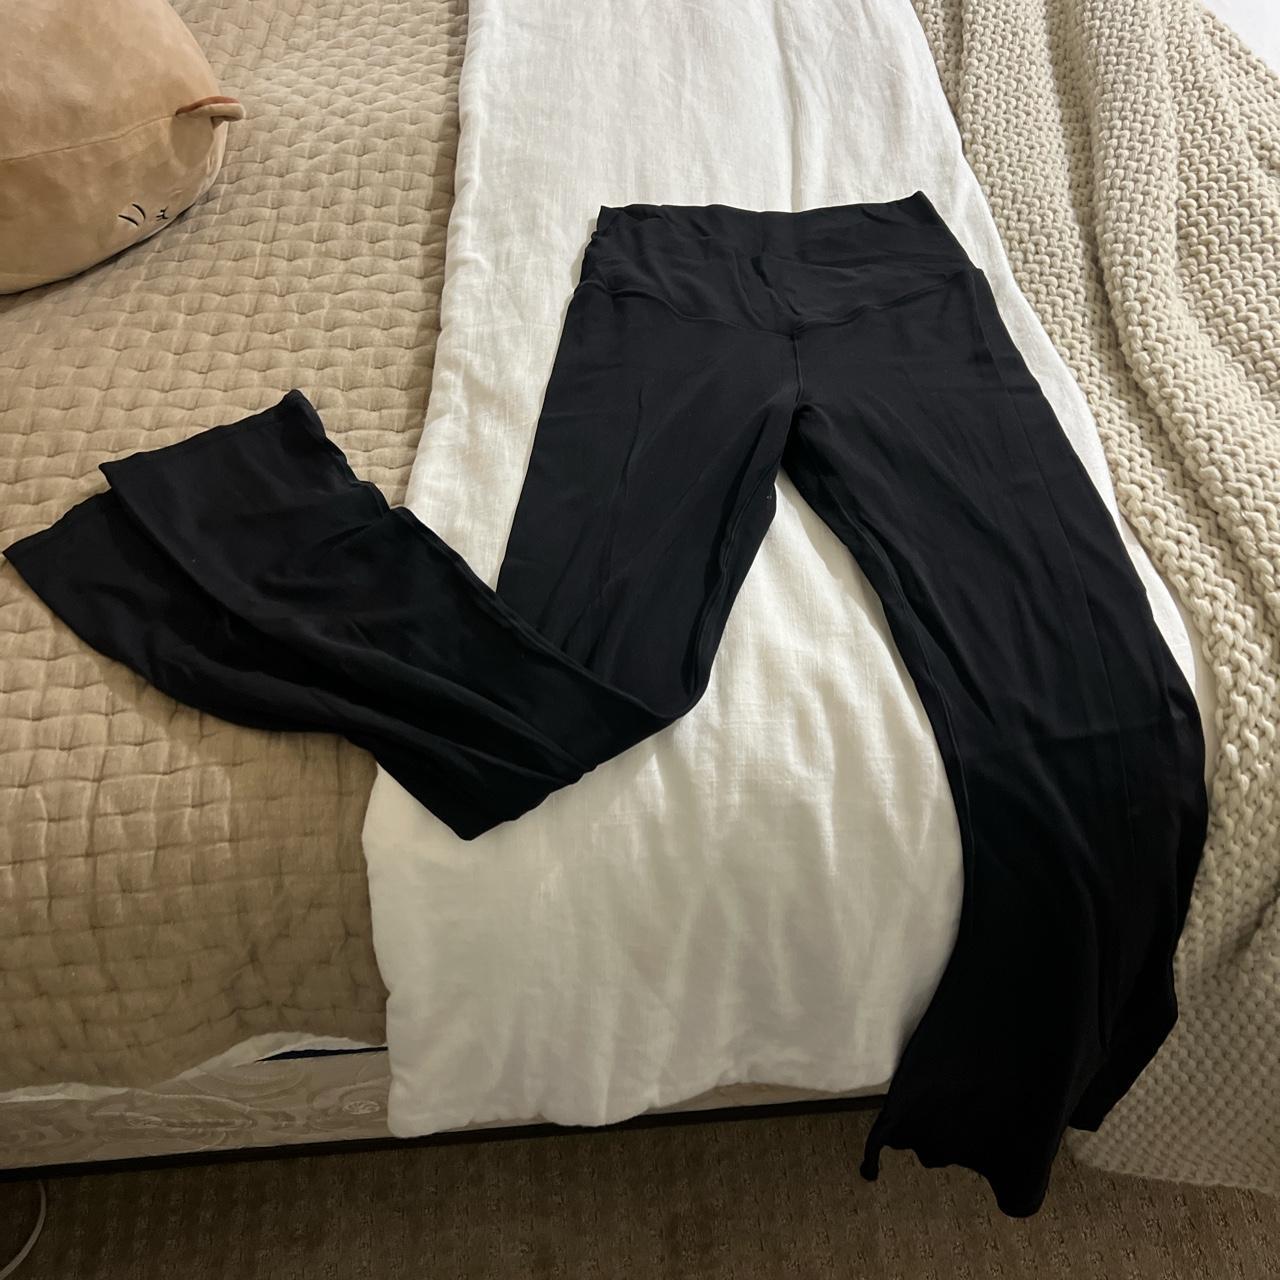 Aerie flare criss cross leggings, very stretchy Can... - Depop